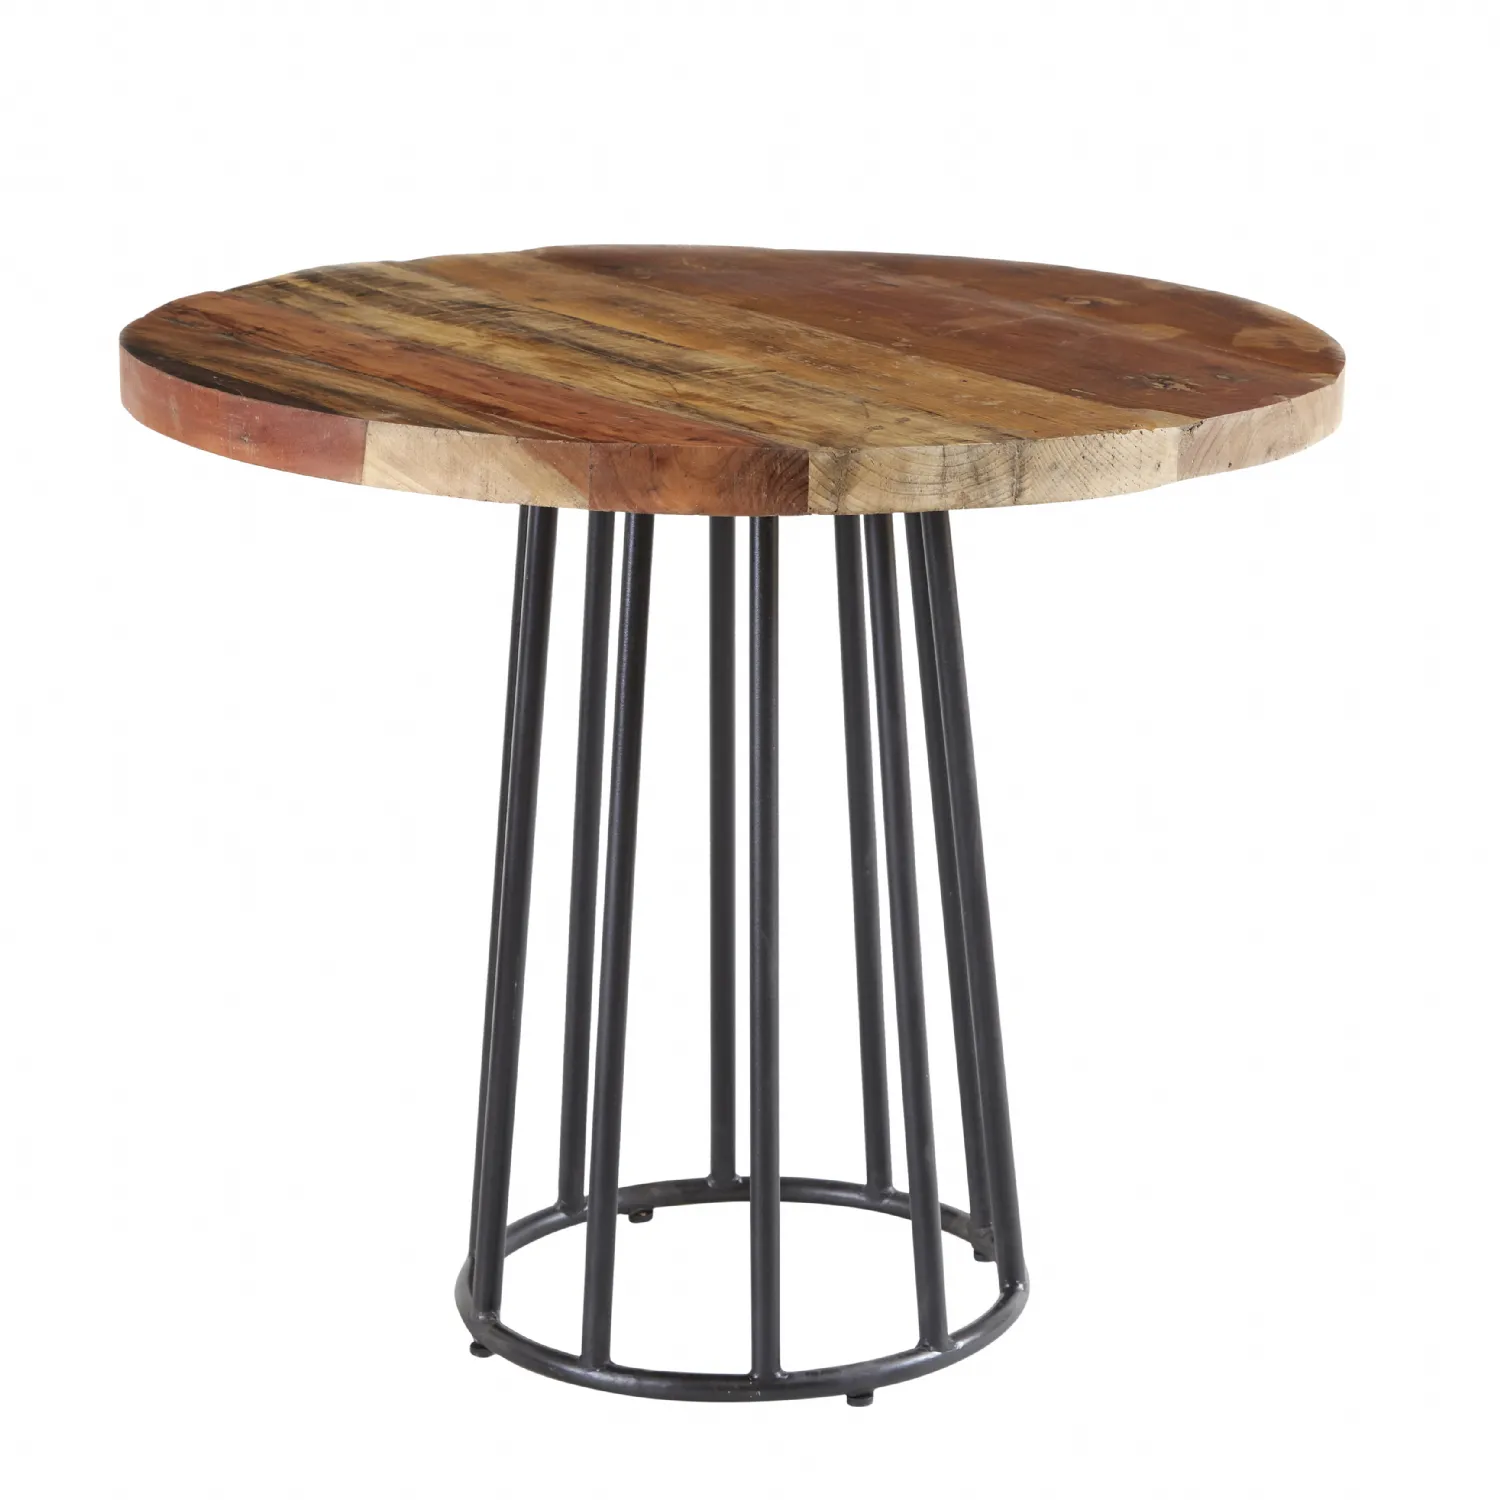 Indian Reclaimed Wood Round Dining Table